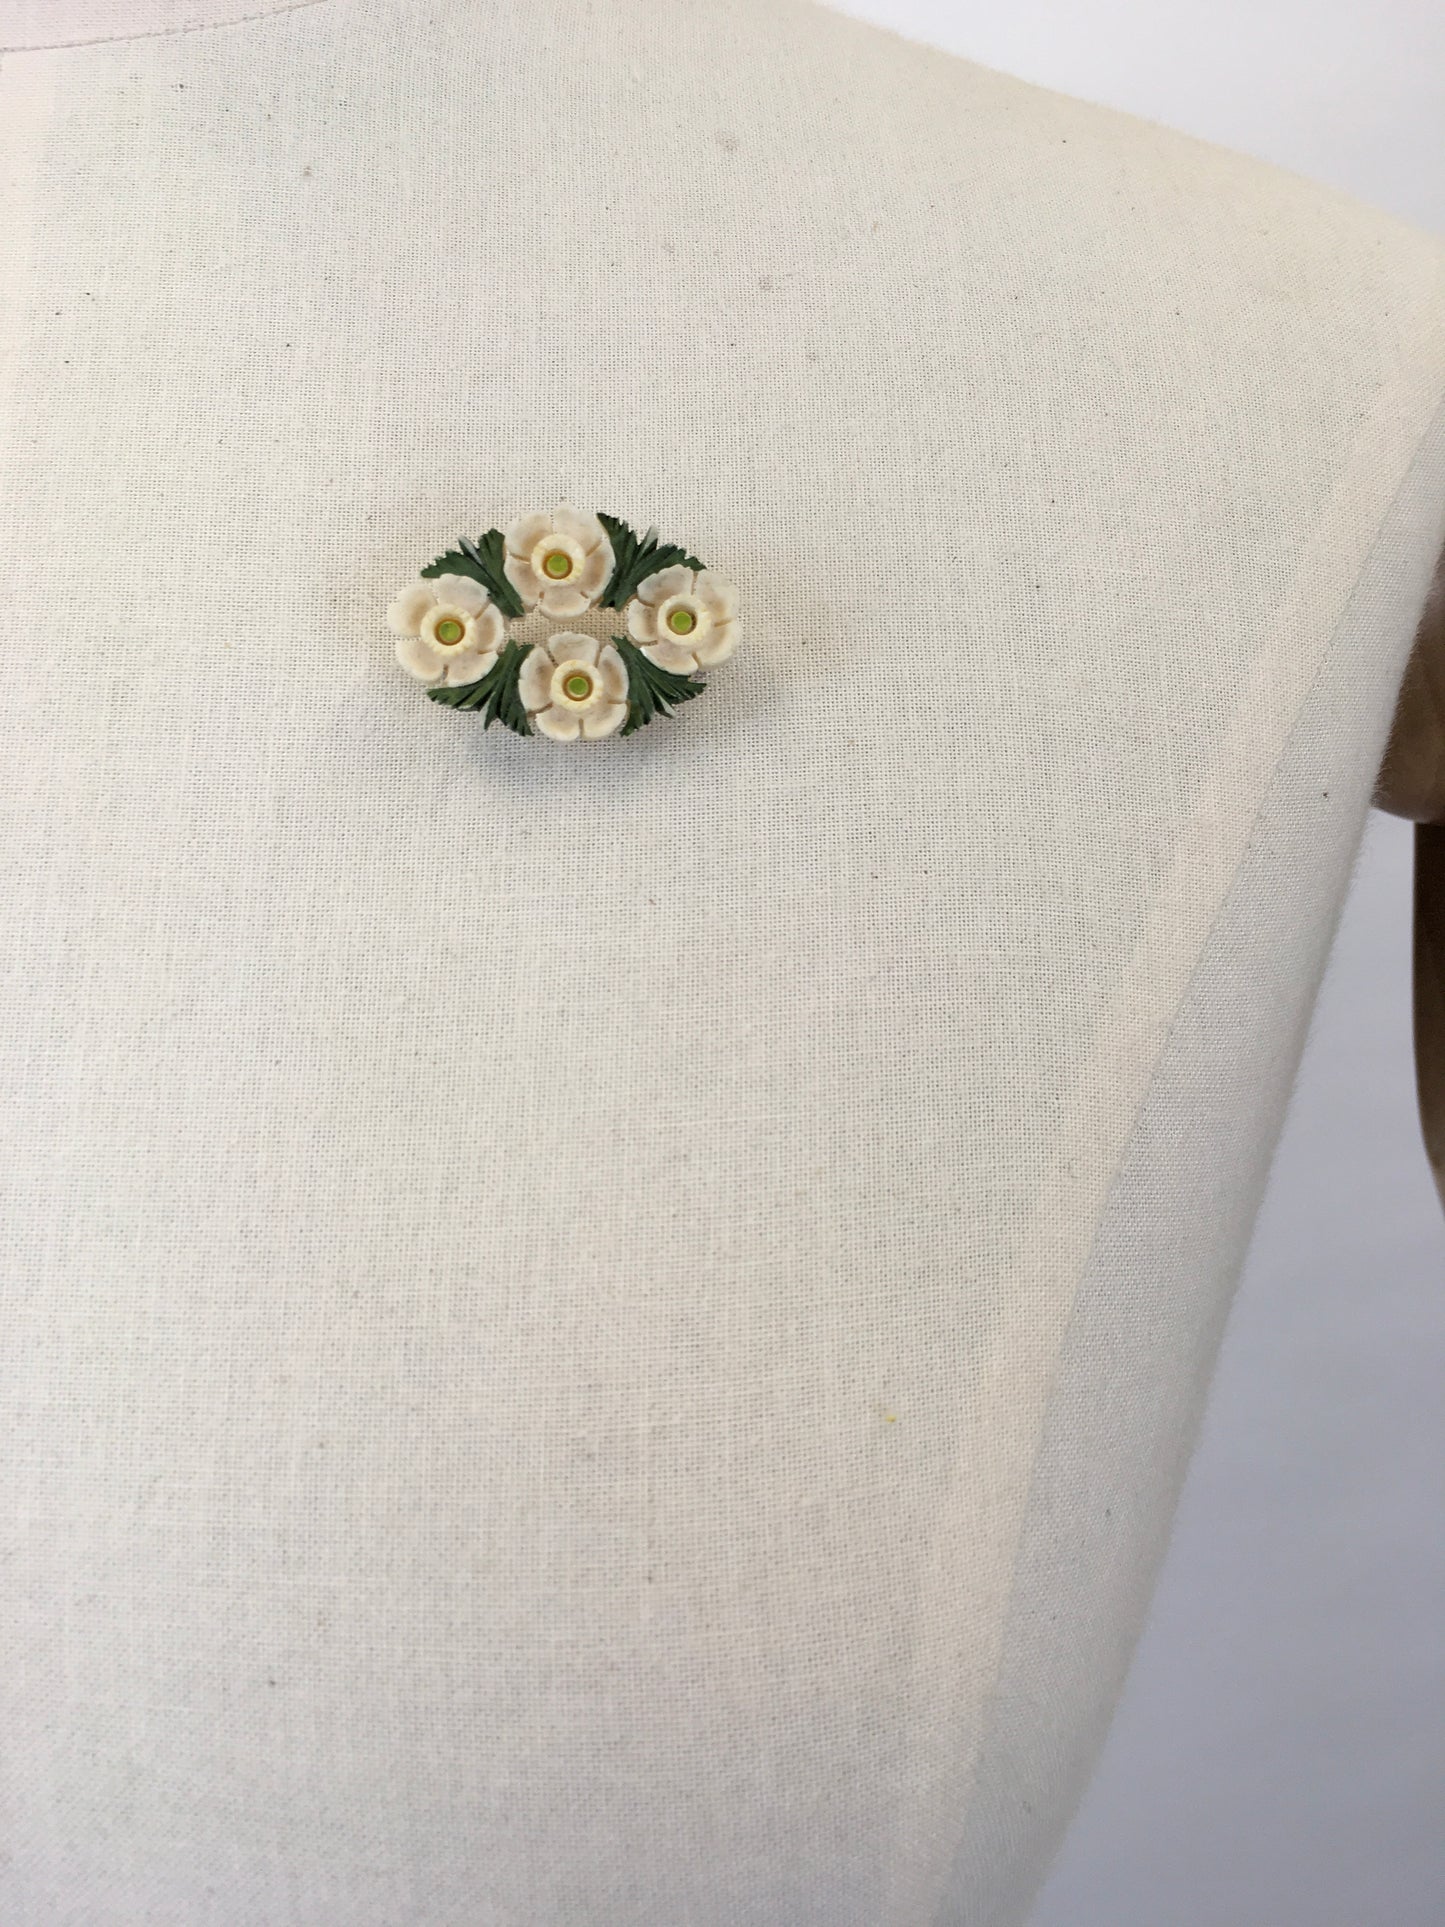 Original 1940s Celluloid Floral Brooch - In Soft White and Green